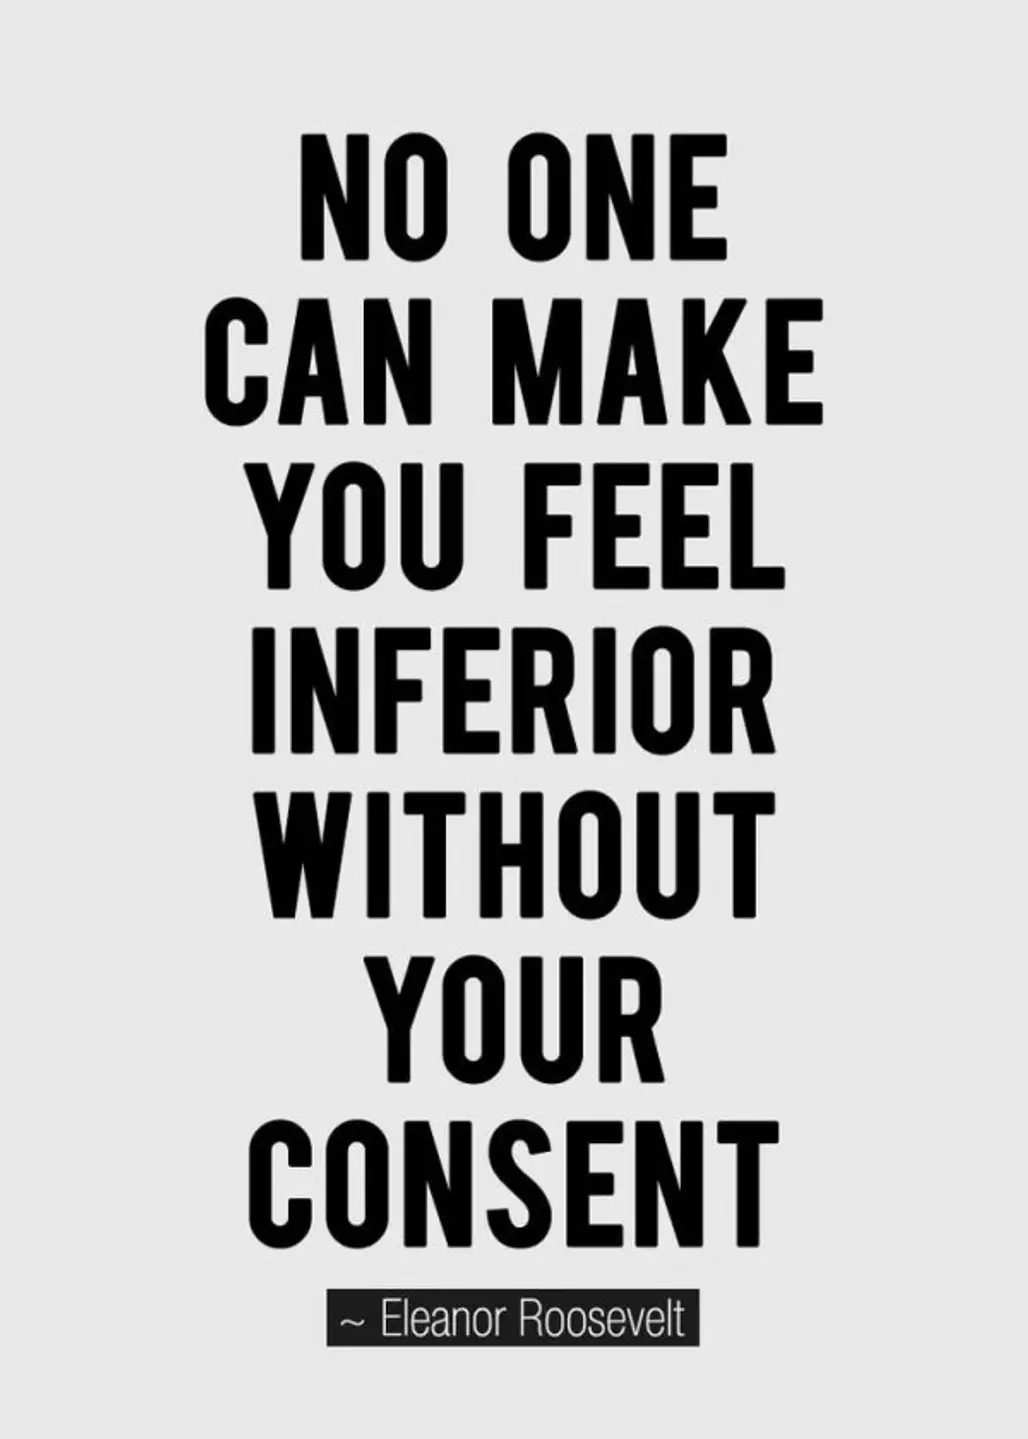 “No One Can Make You Feel Inferior without Your Consent.”